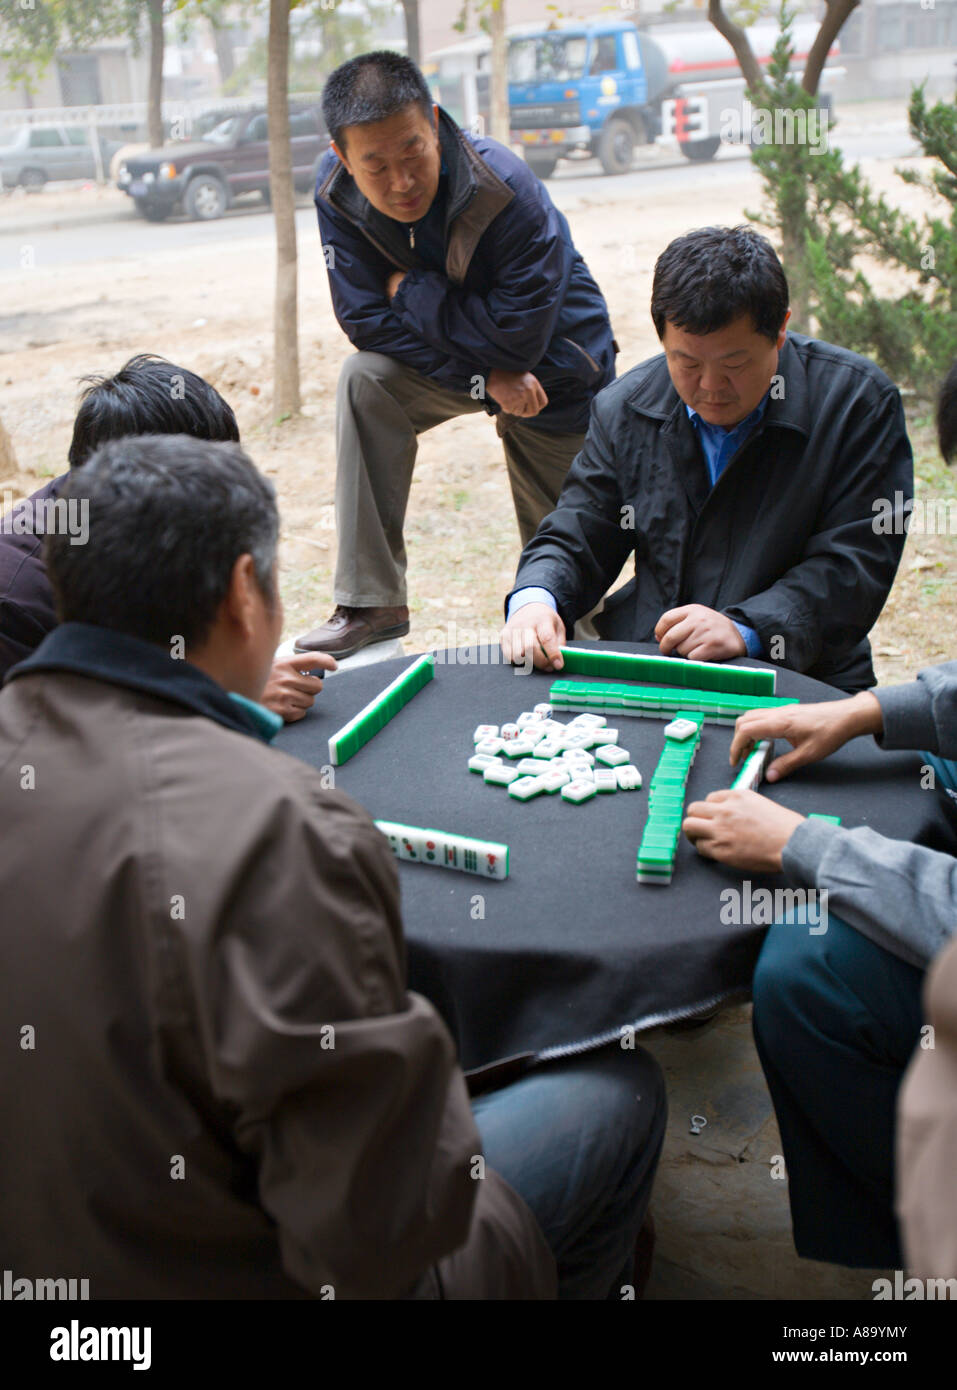 CHINA BEIJING Chinese men playing mahjong a traditional Chinese game of skill and luck using tiles Stock Photo